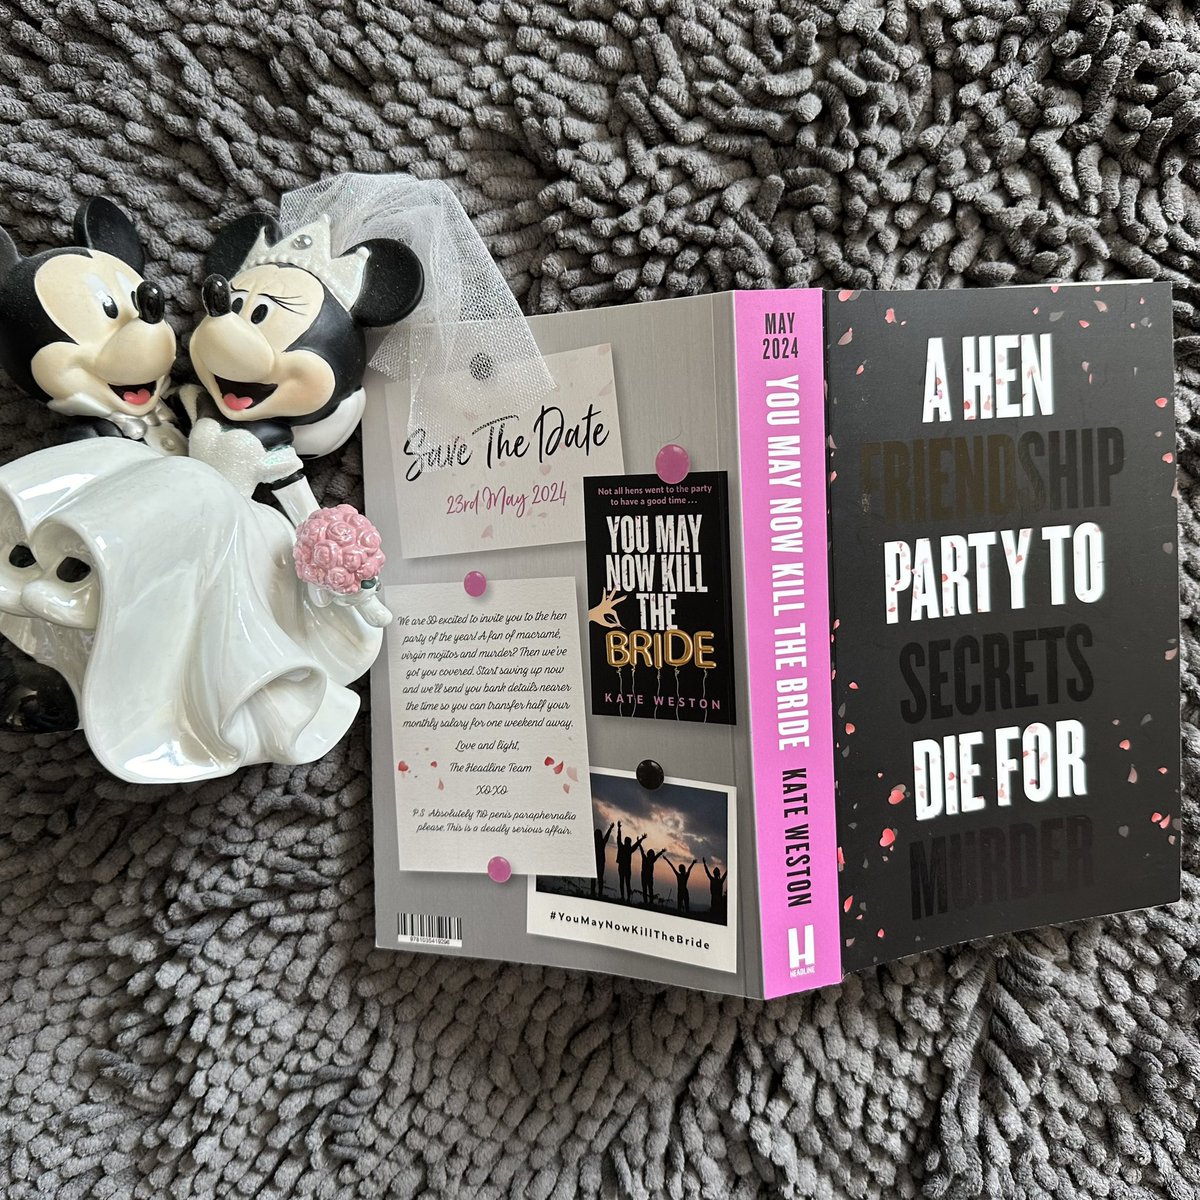 📚#BookReview📚 4⭐️ A Hen Party to die for, friendships pushed to the limit, secrets uncovered and a touch of murder too! You will want to find out more in #YouMayNowKillTheBride by @kateelizweston 🔗 Full Review in thread below #BookTwitter #Bookblogger